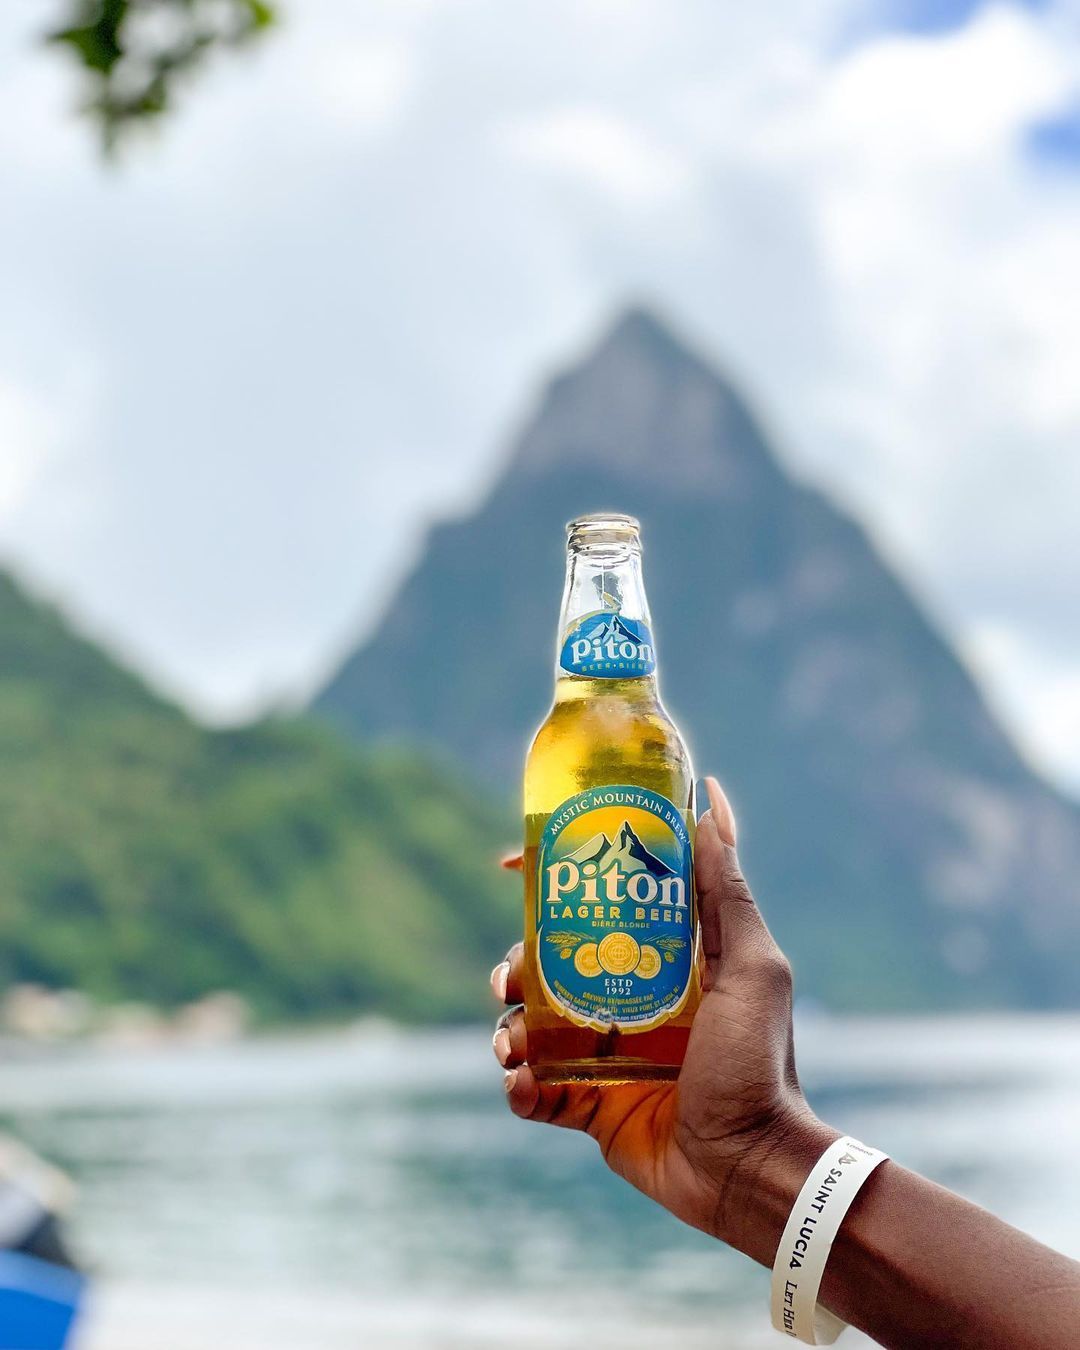 Best Popular Foods & Drinks to try on Vacation in St. Lucia